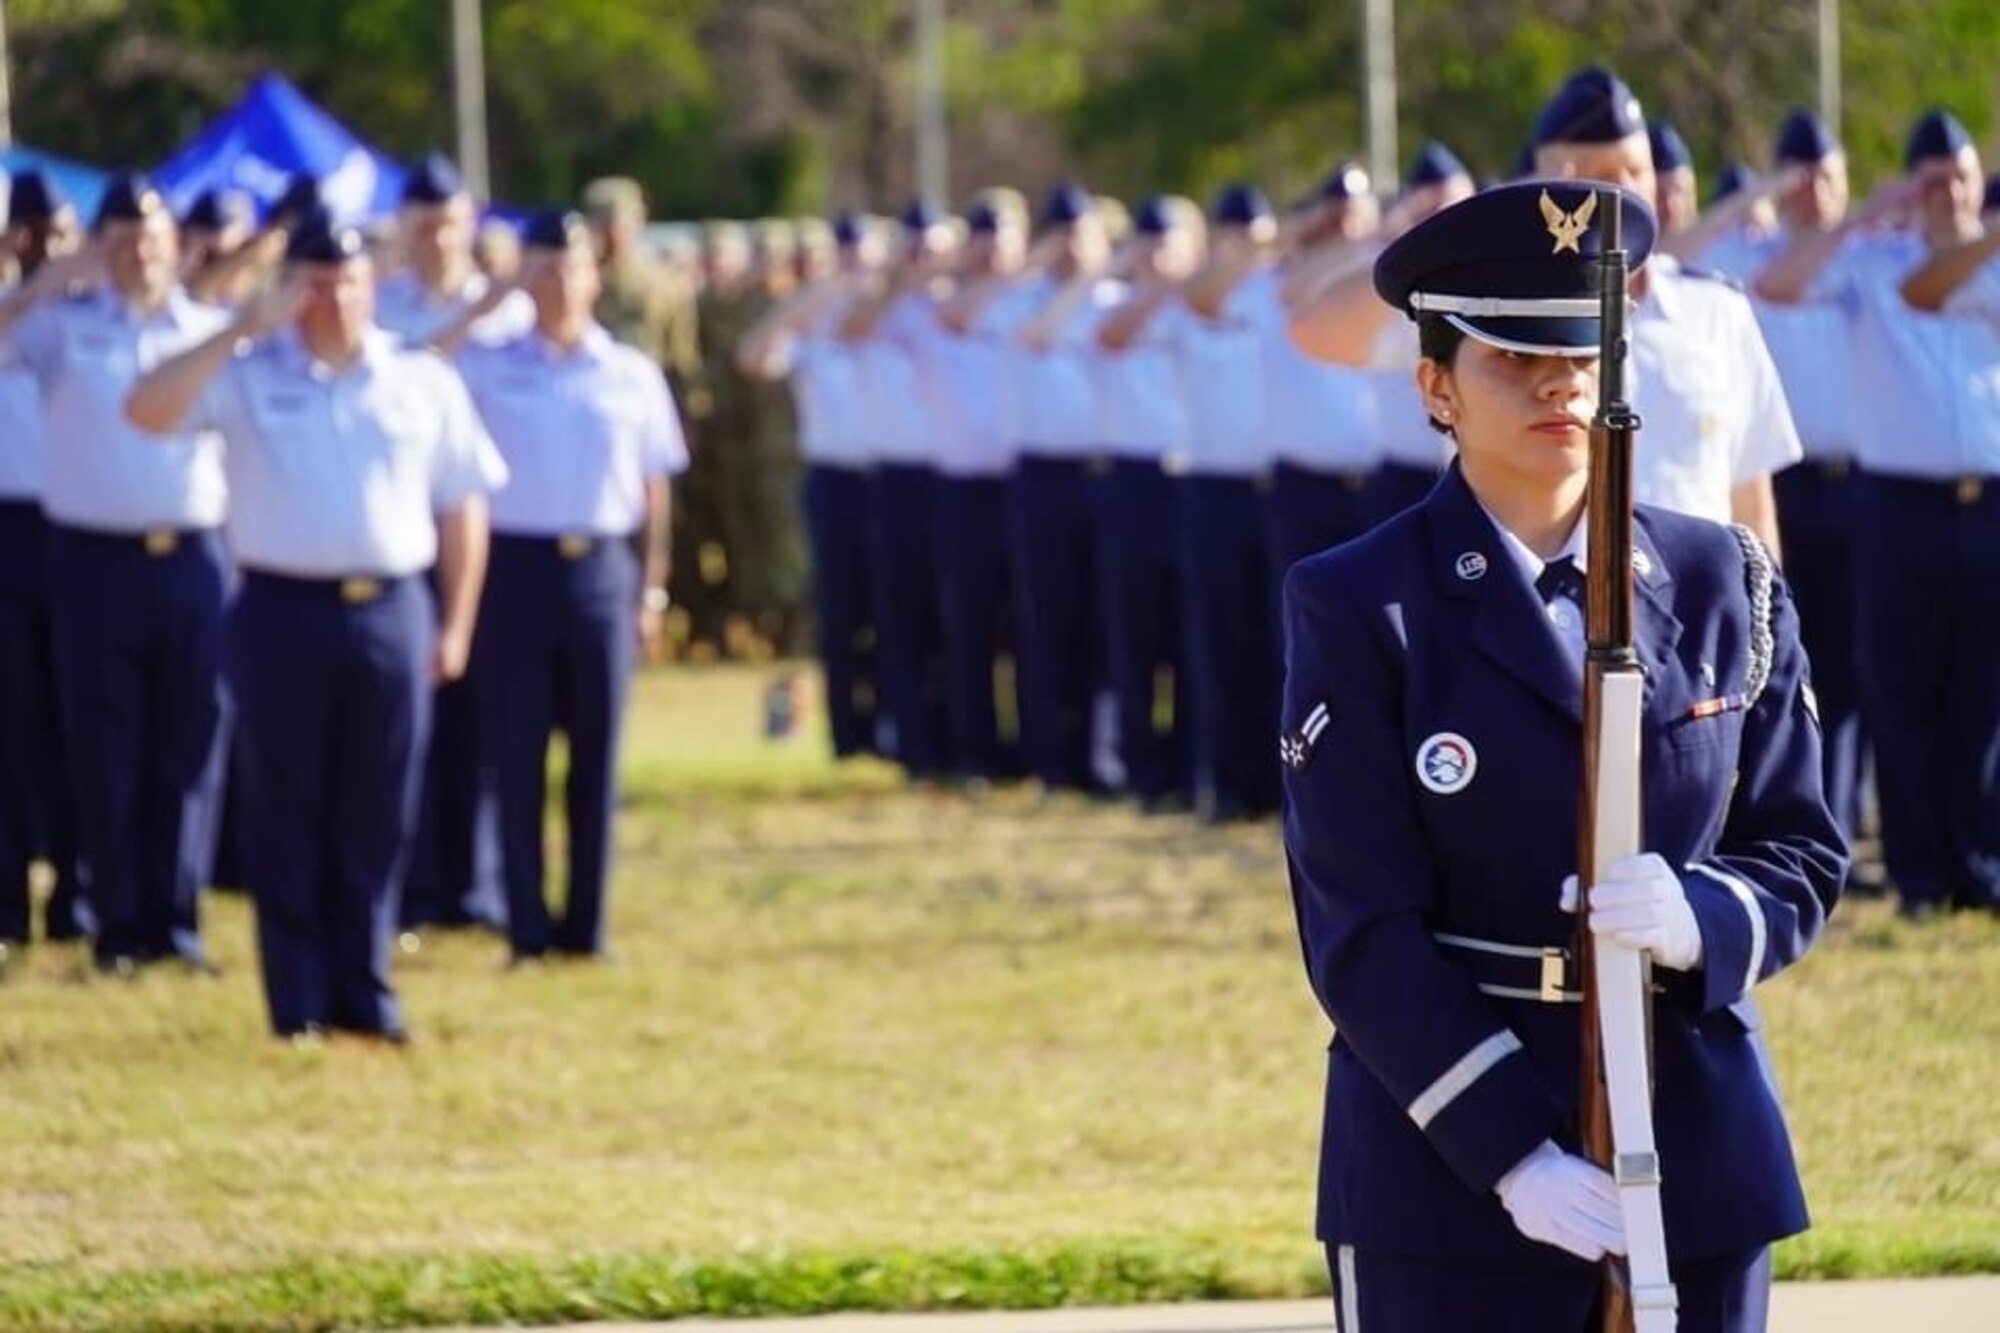 An Honor Guard member stands at attention with Airmen in the background.